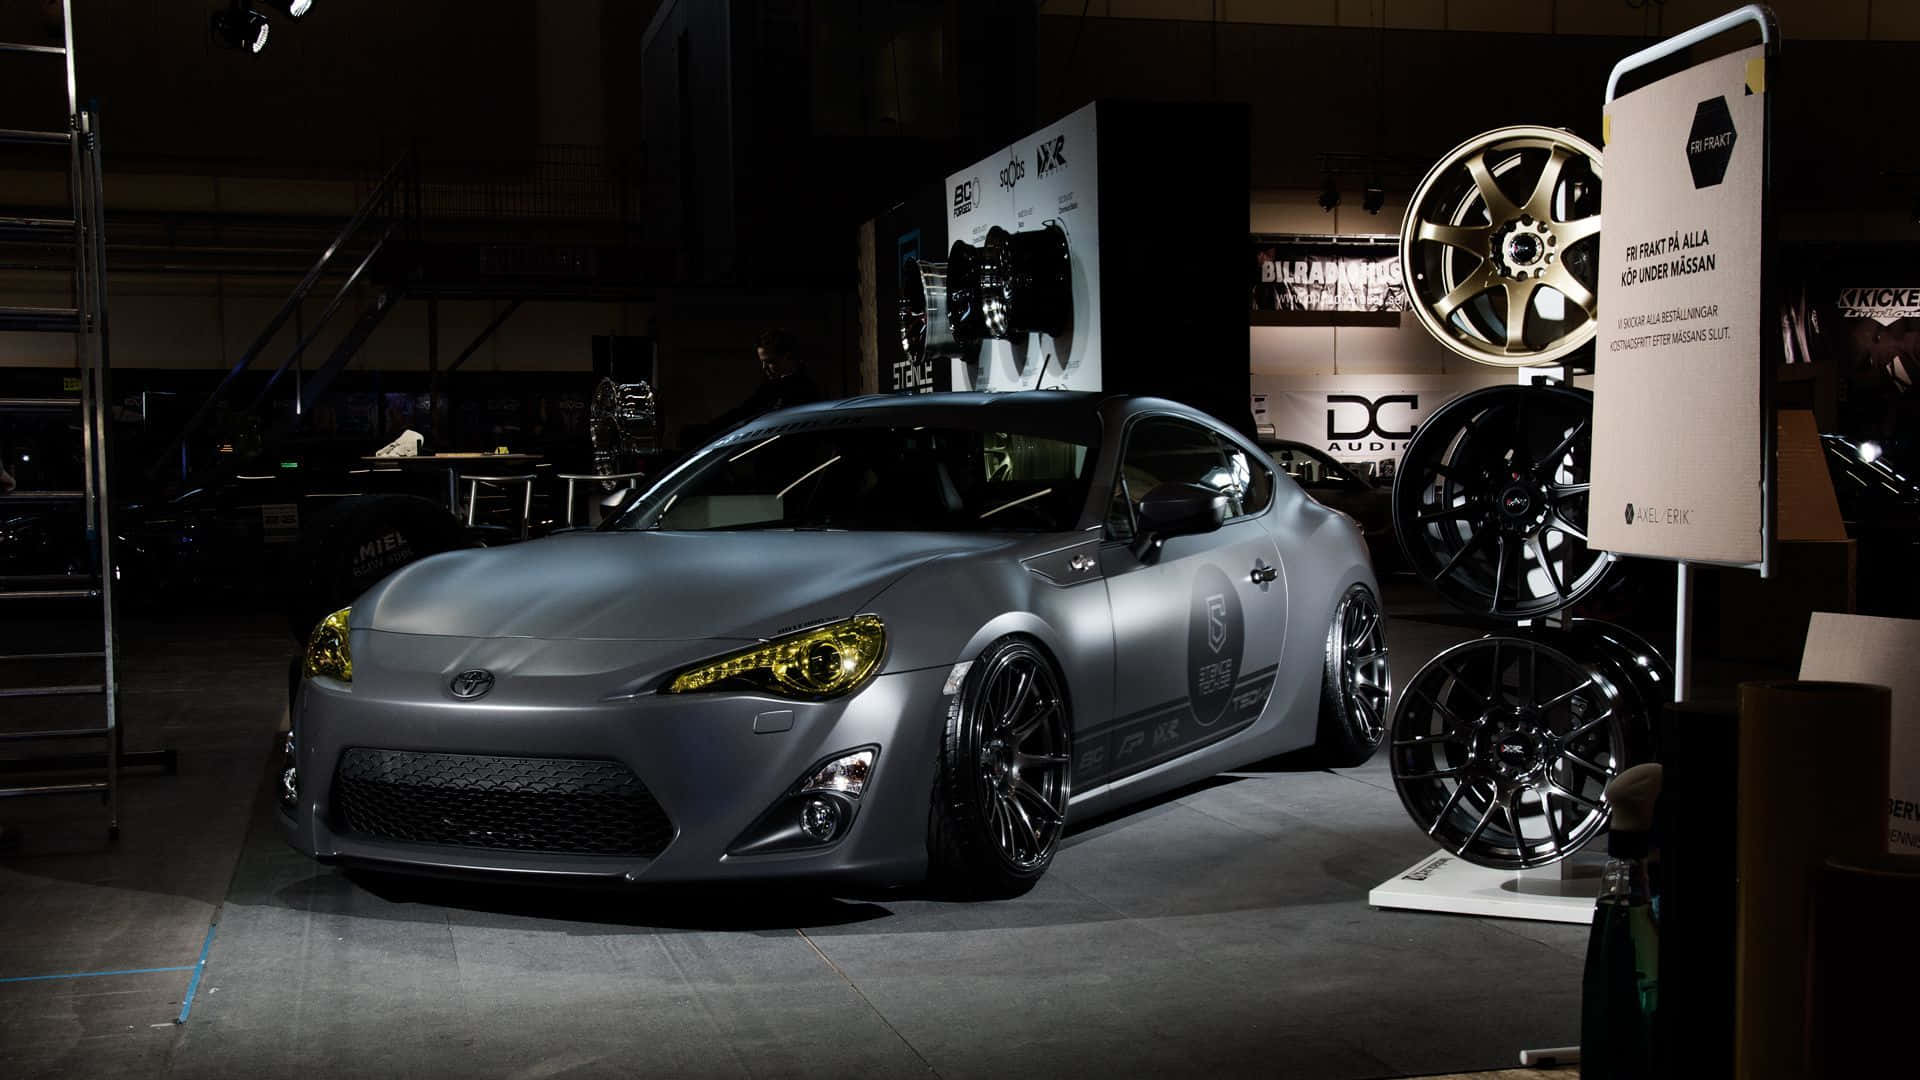 The iconic 4K Toyota 86 features classic and modern design elements. Wallpaper